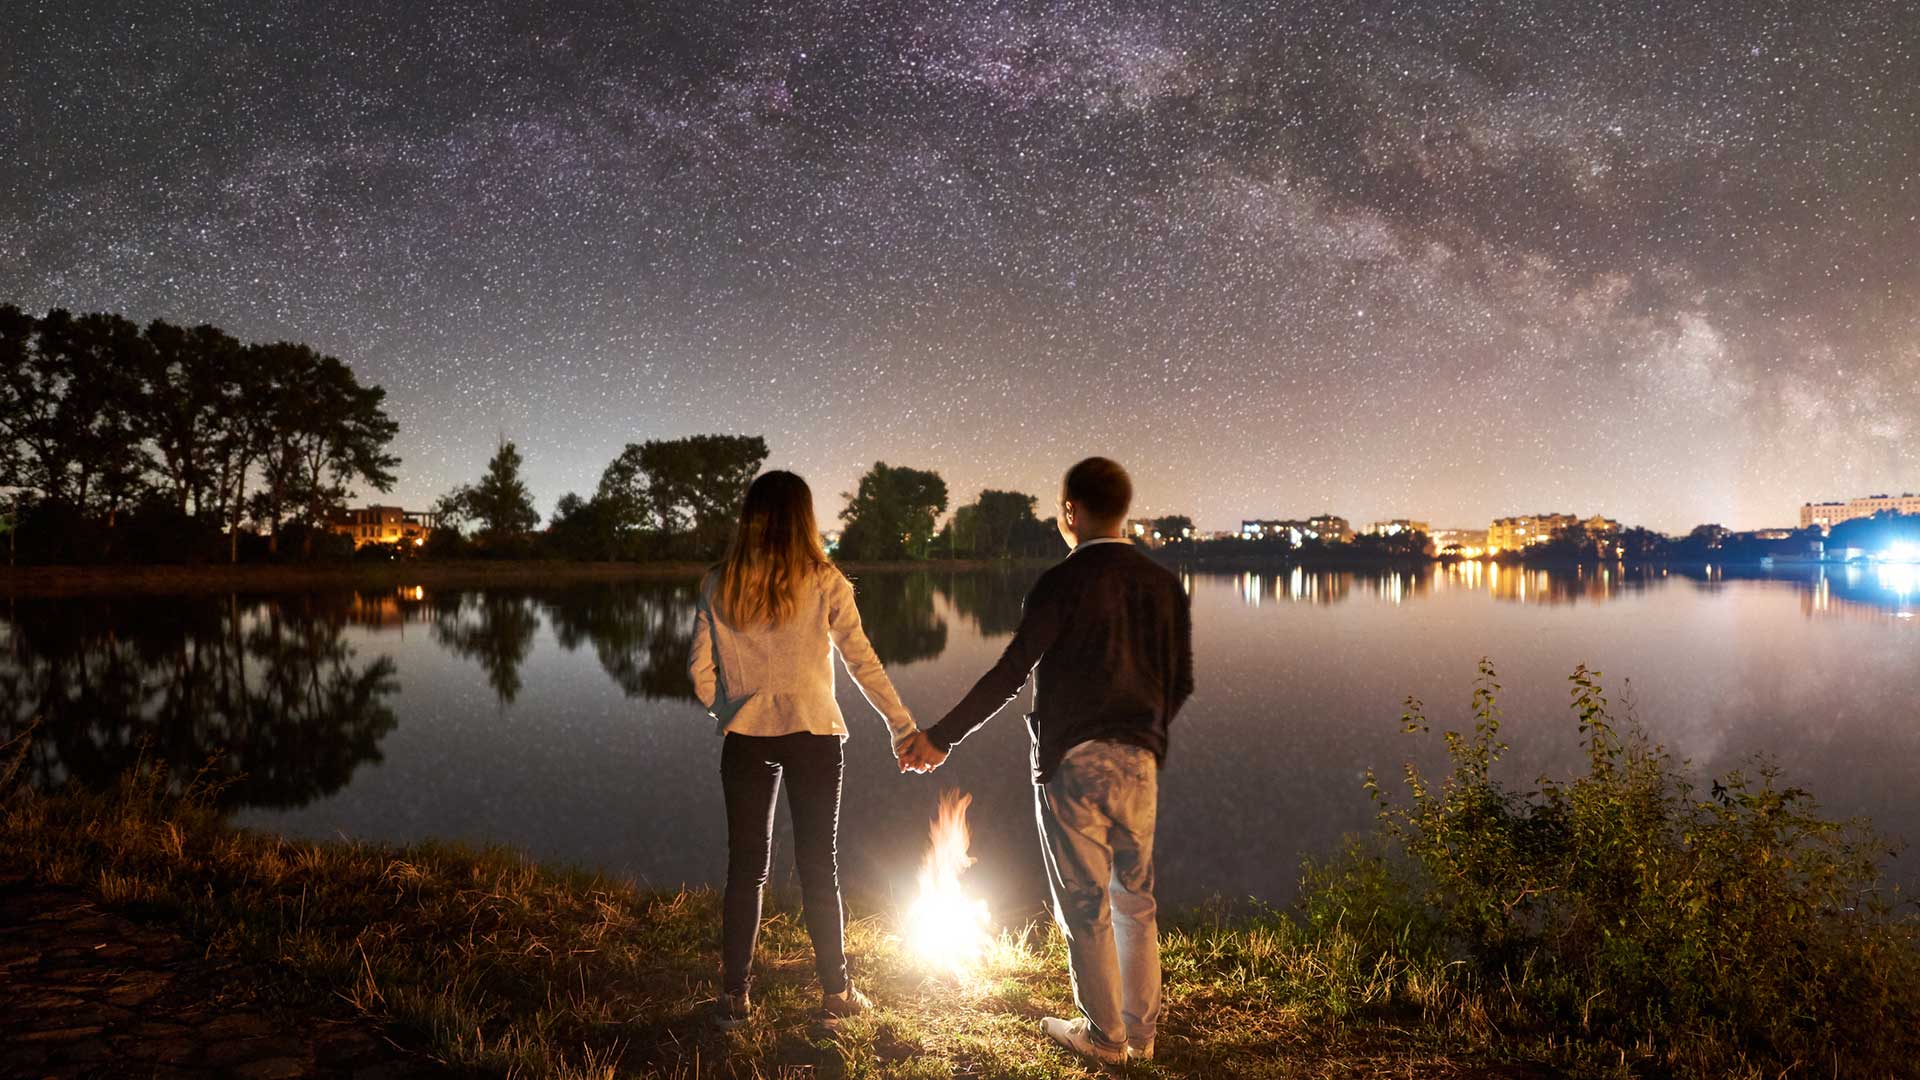 Couple holding hands at lake under night sky